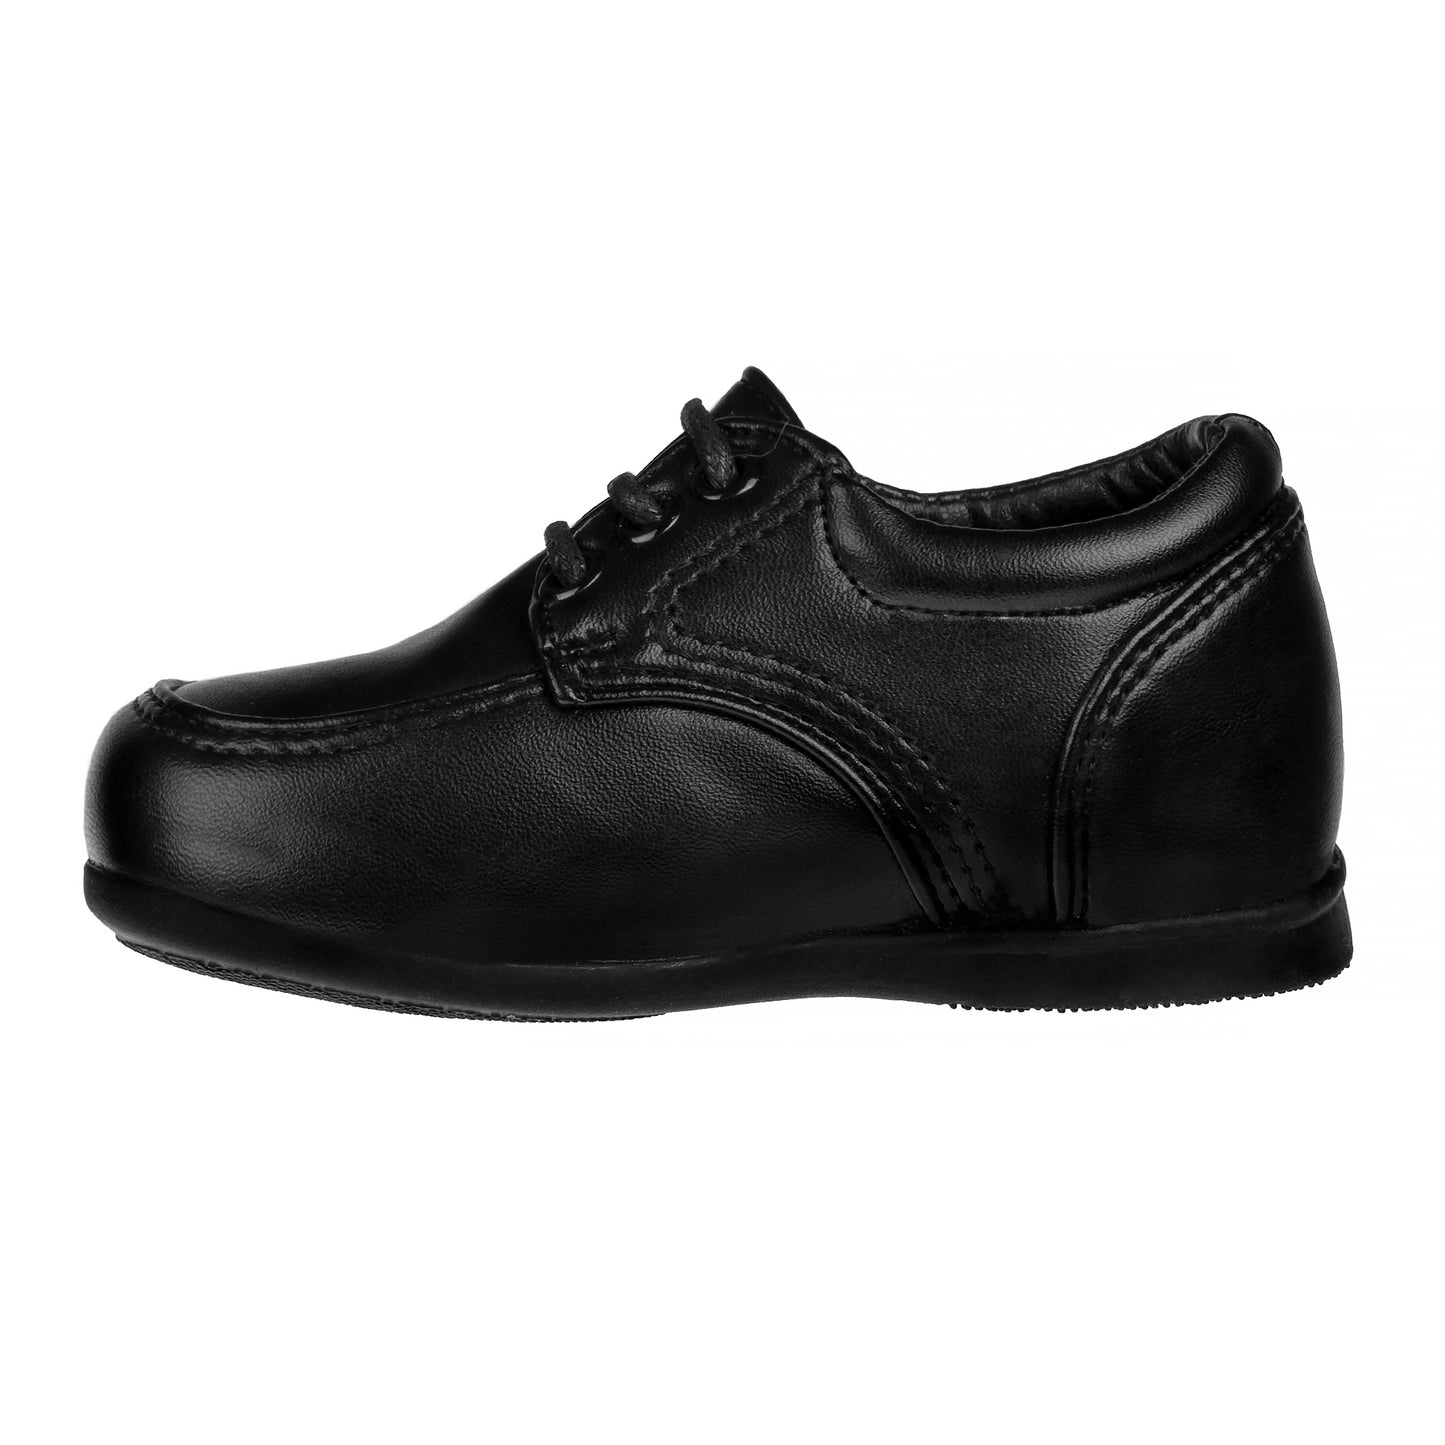 Josmo Boys Laced Dress Shoes